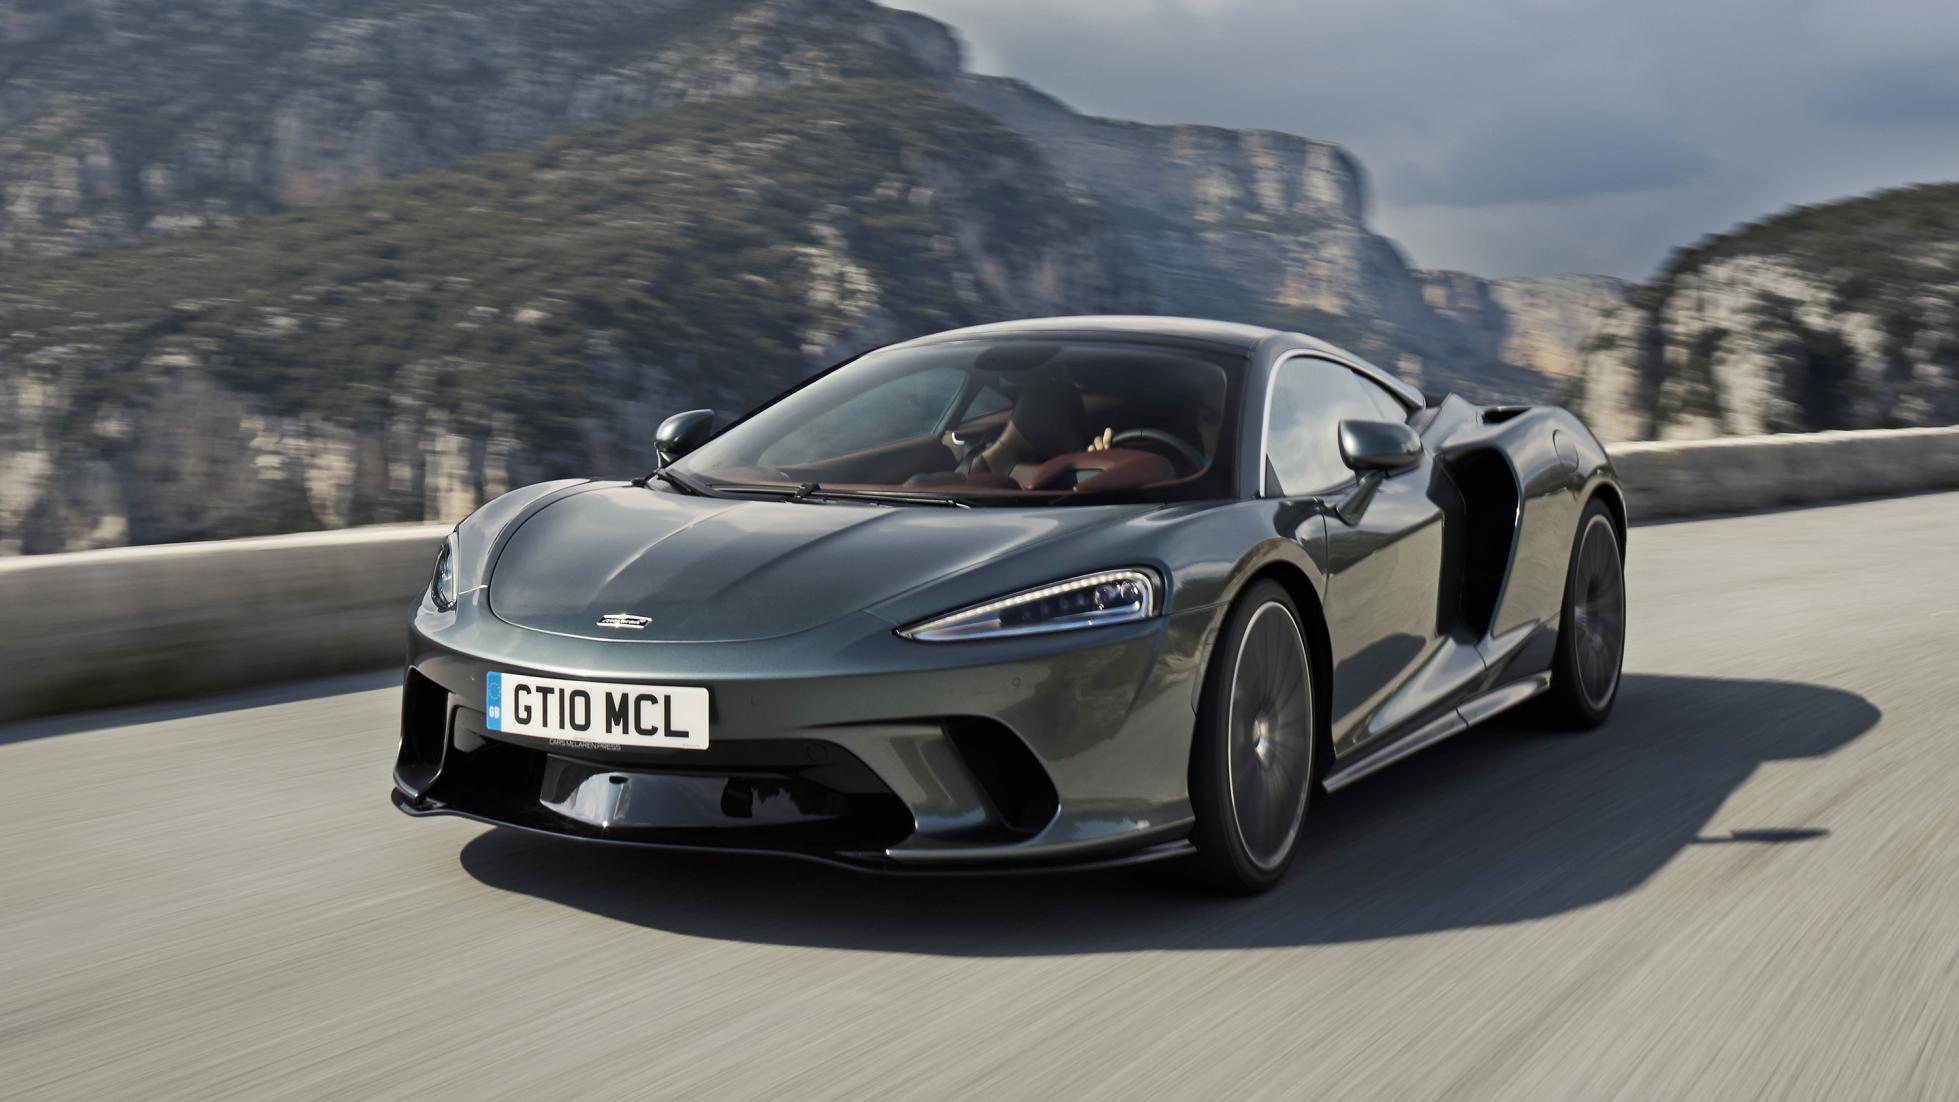 McLaren GT Review: is it really an Aston Martin rival?